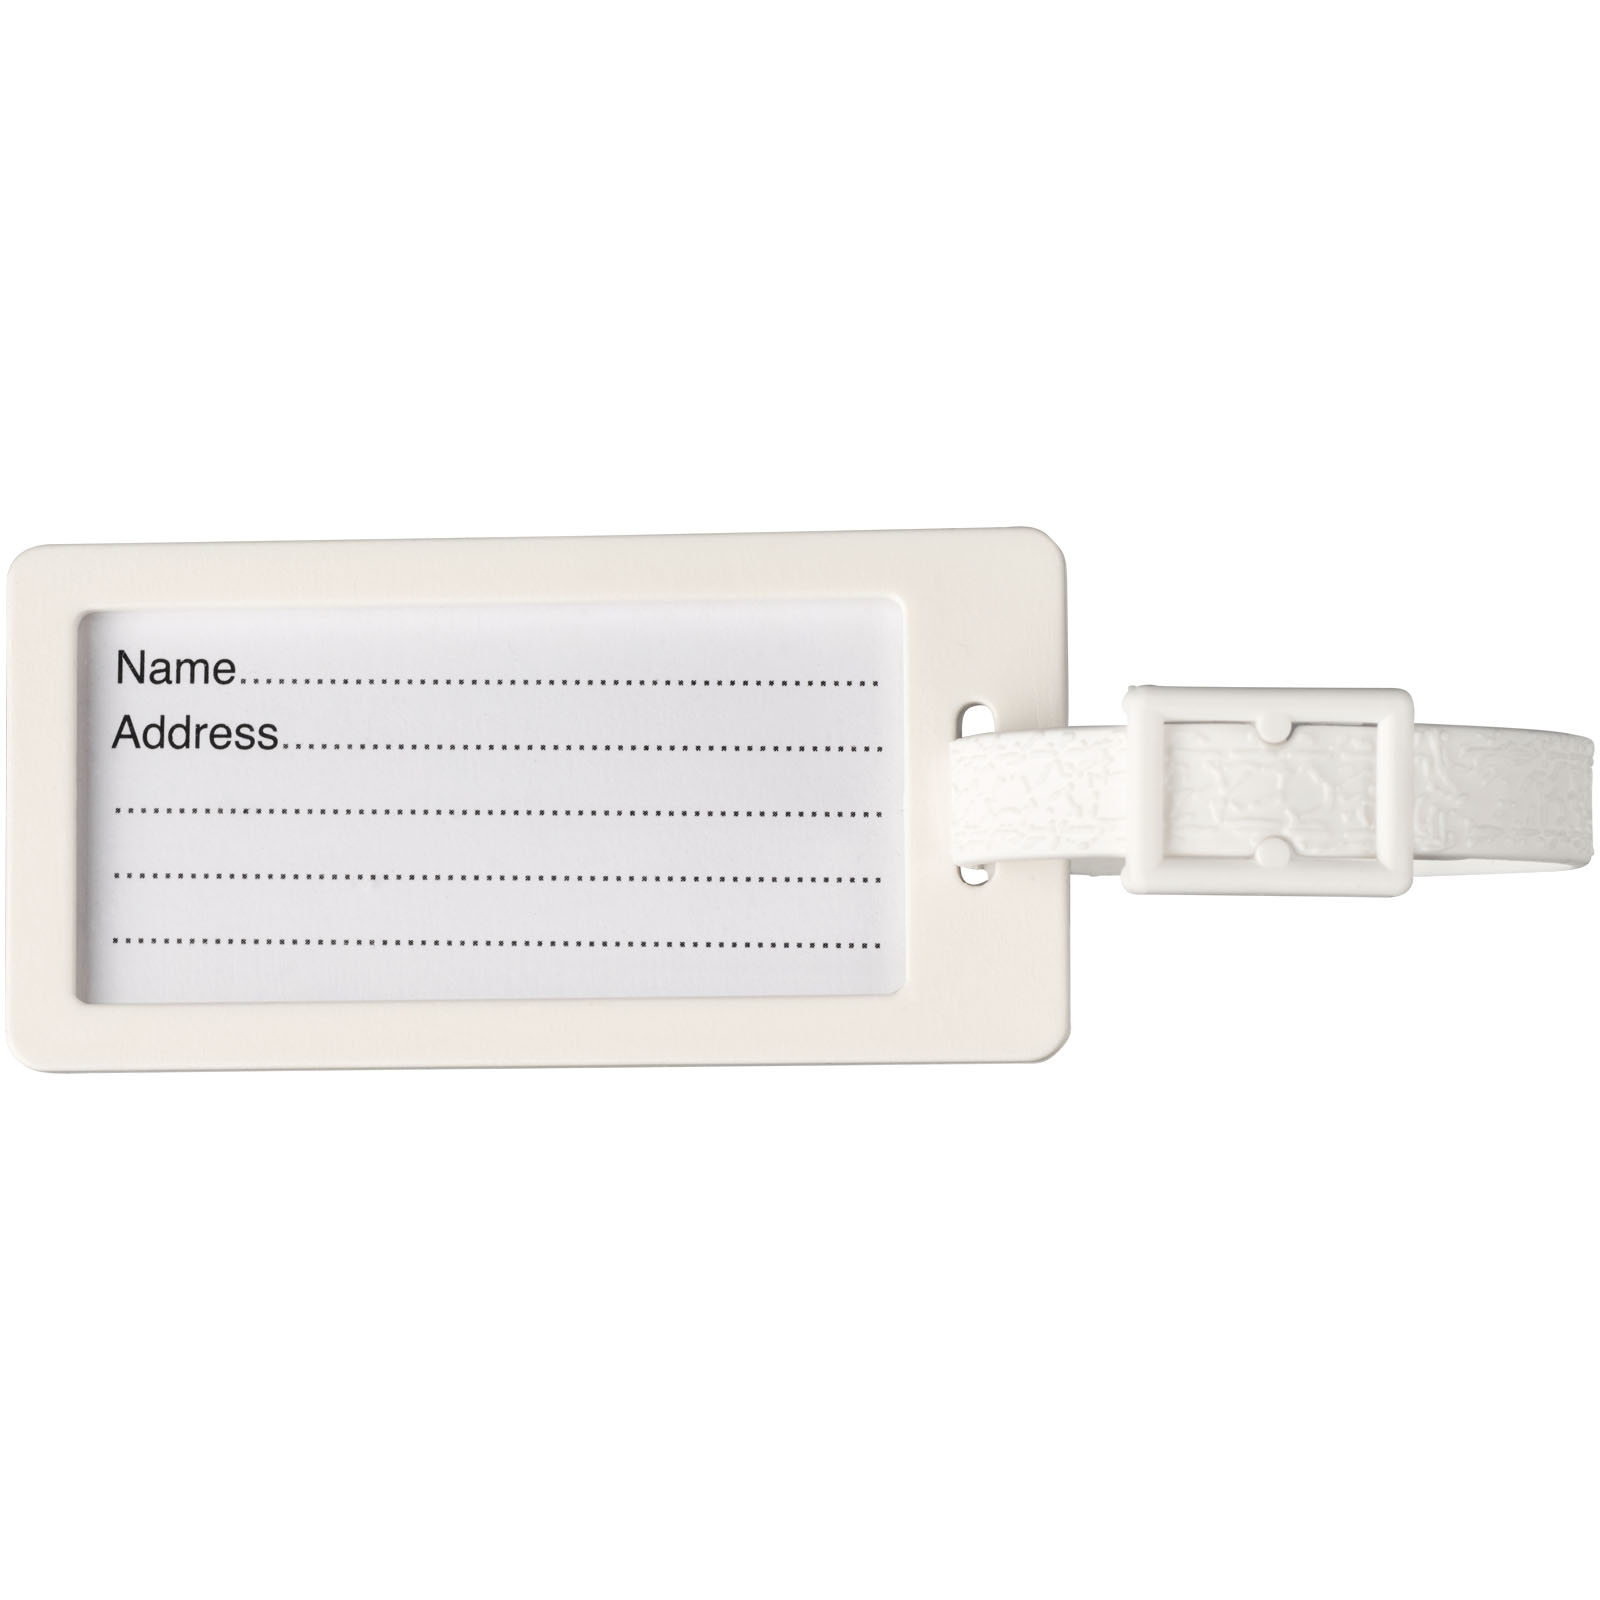 Advertising Travel Accessories - River recycled window luggage tag - 1